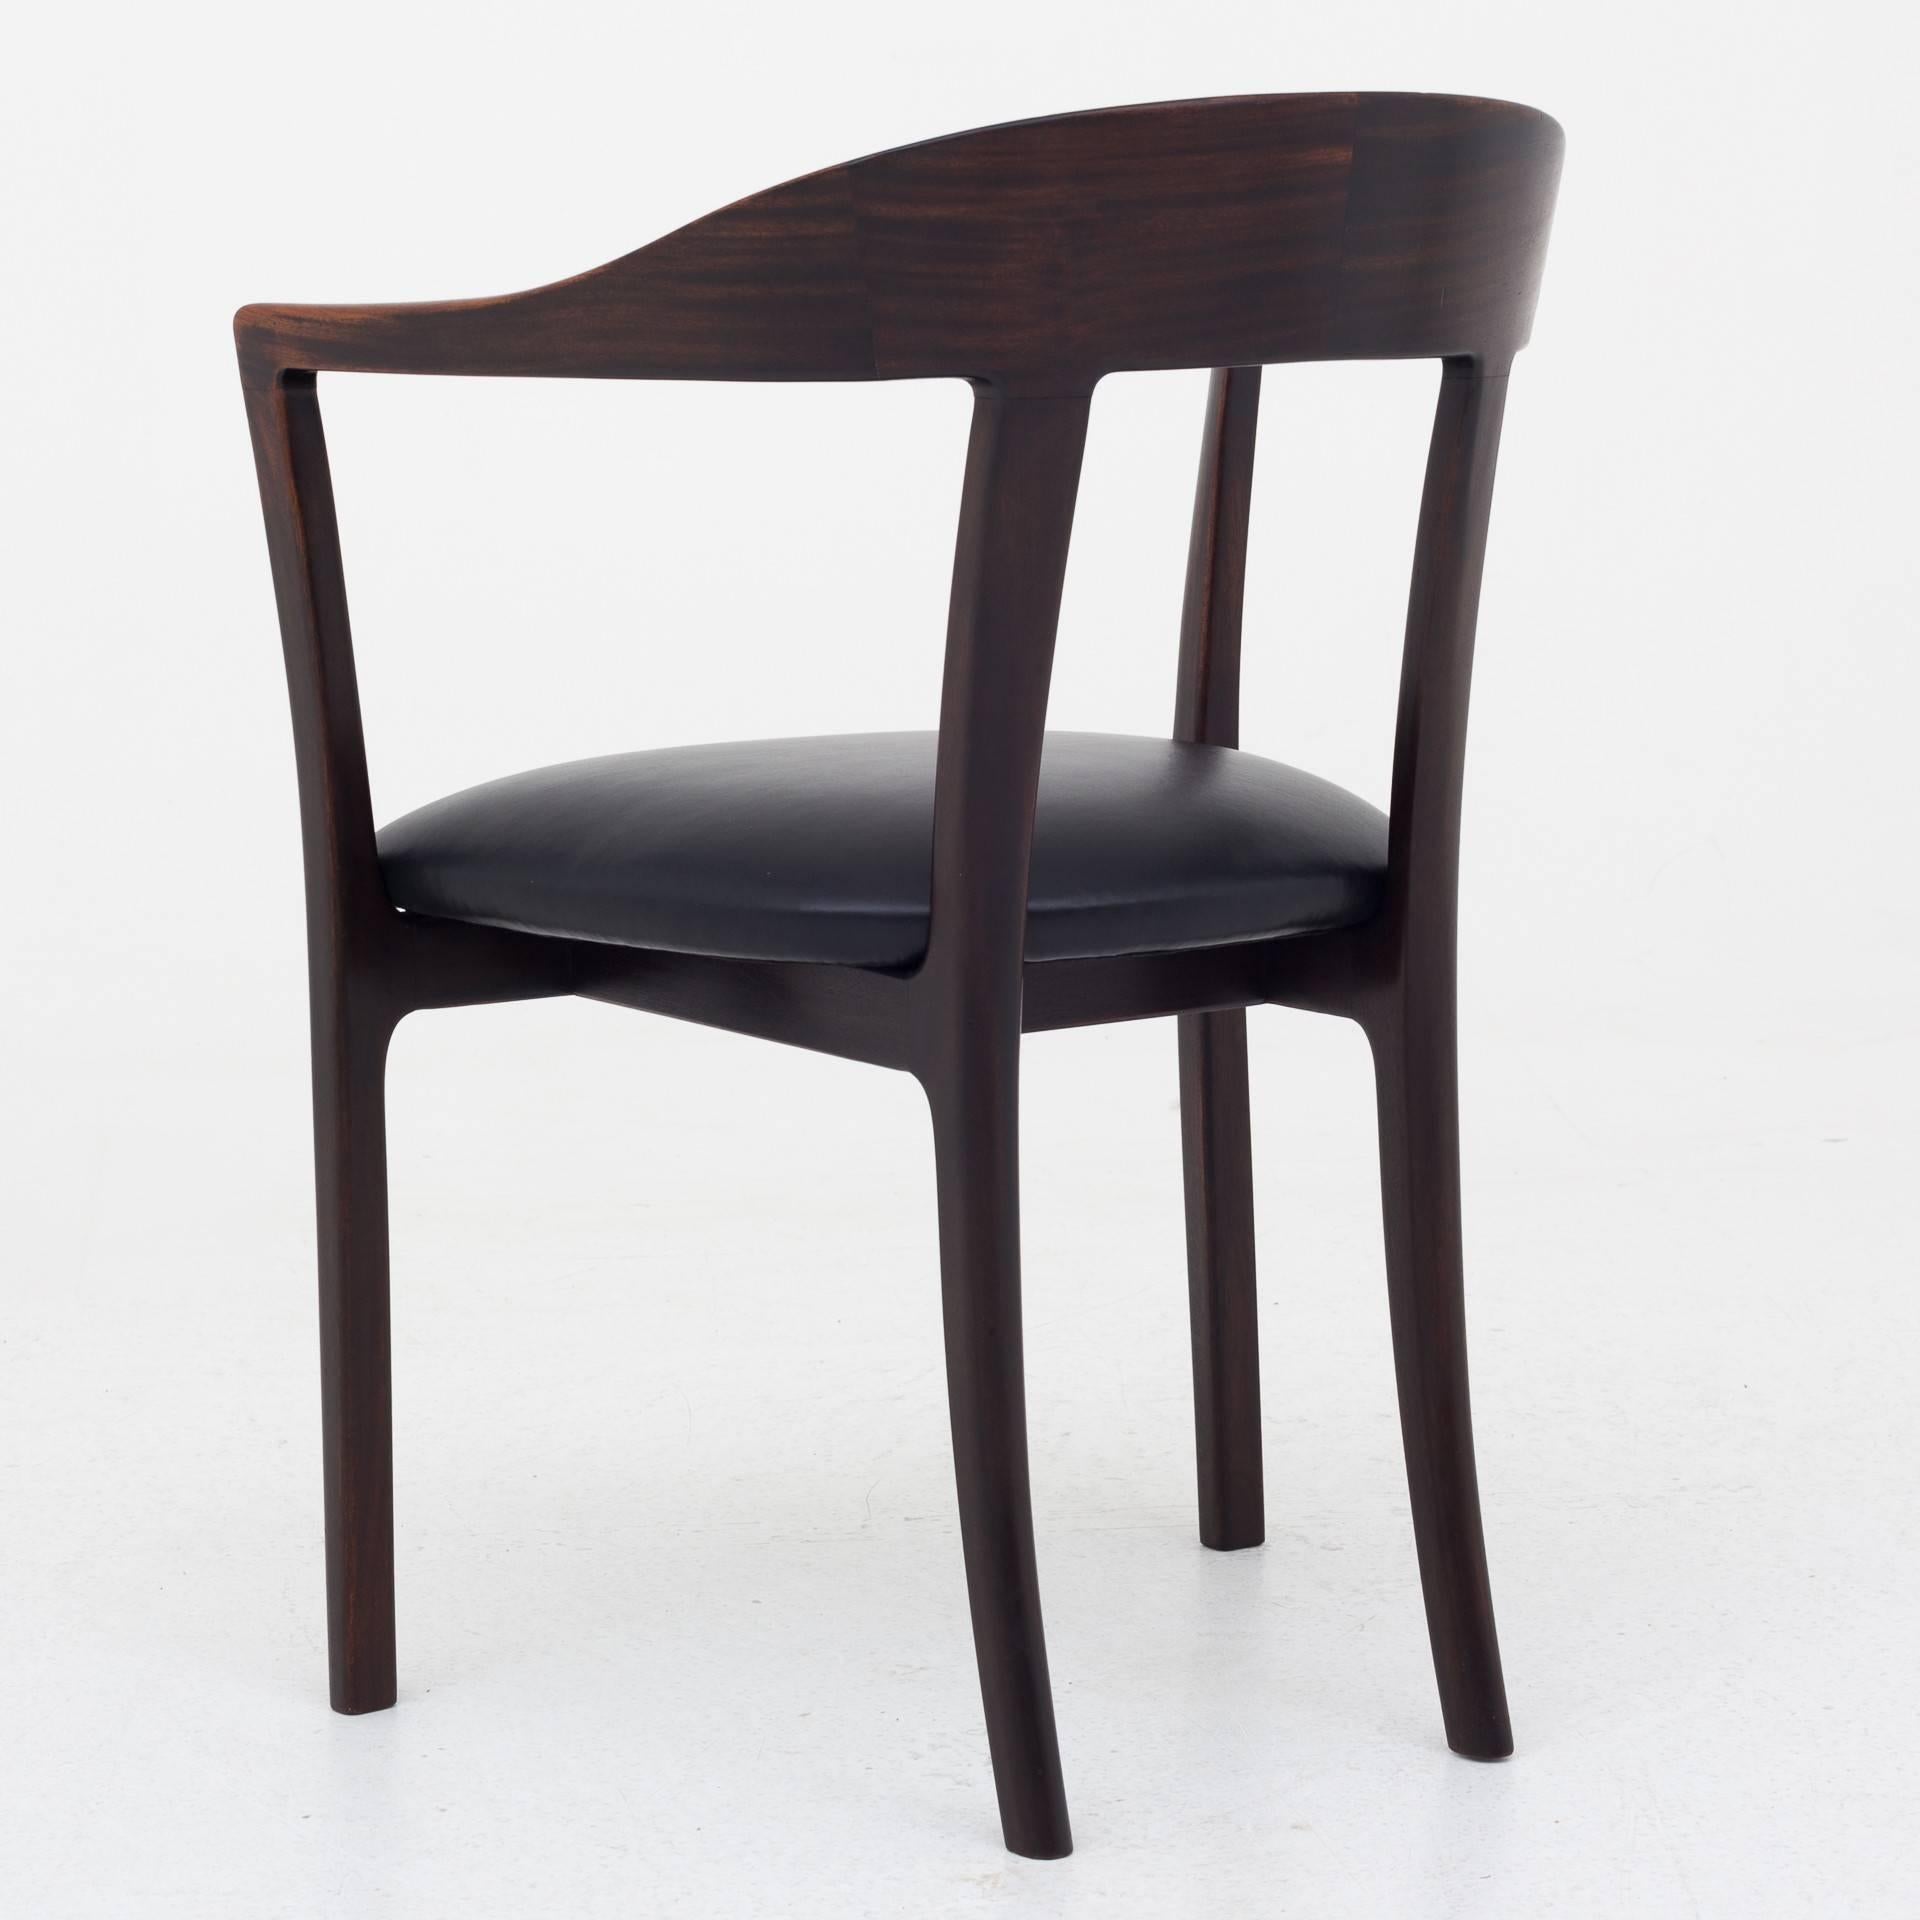 J 2833, armchair in stained mahogany, reupholstered seat in black canyon leather. Designed in 1958. Maker A. J. Iversen.